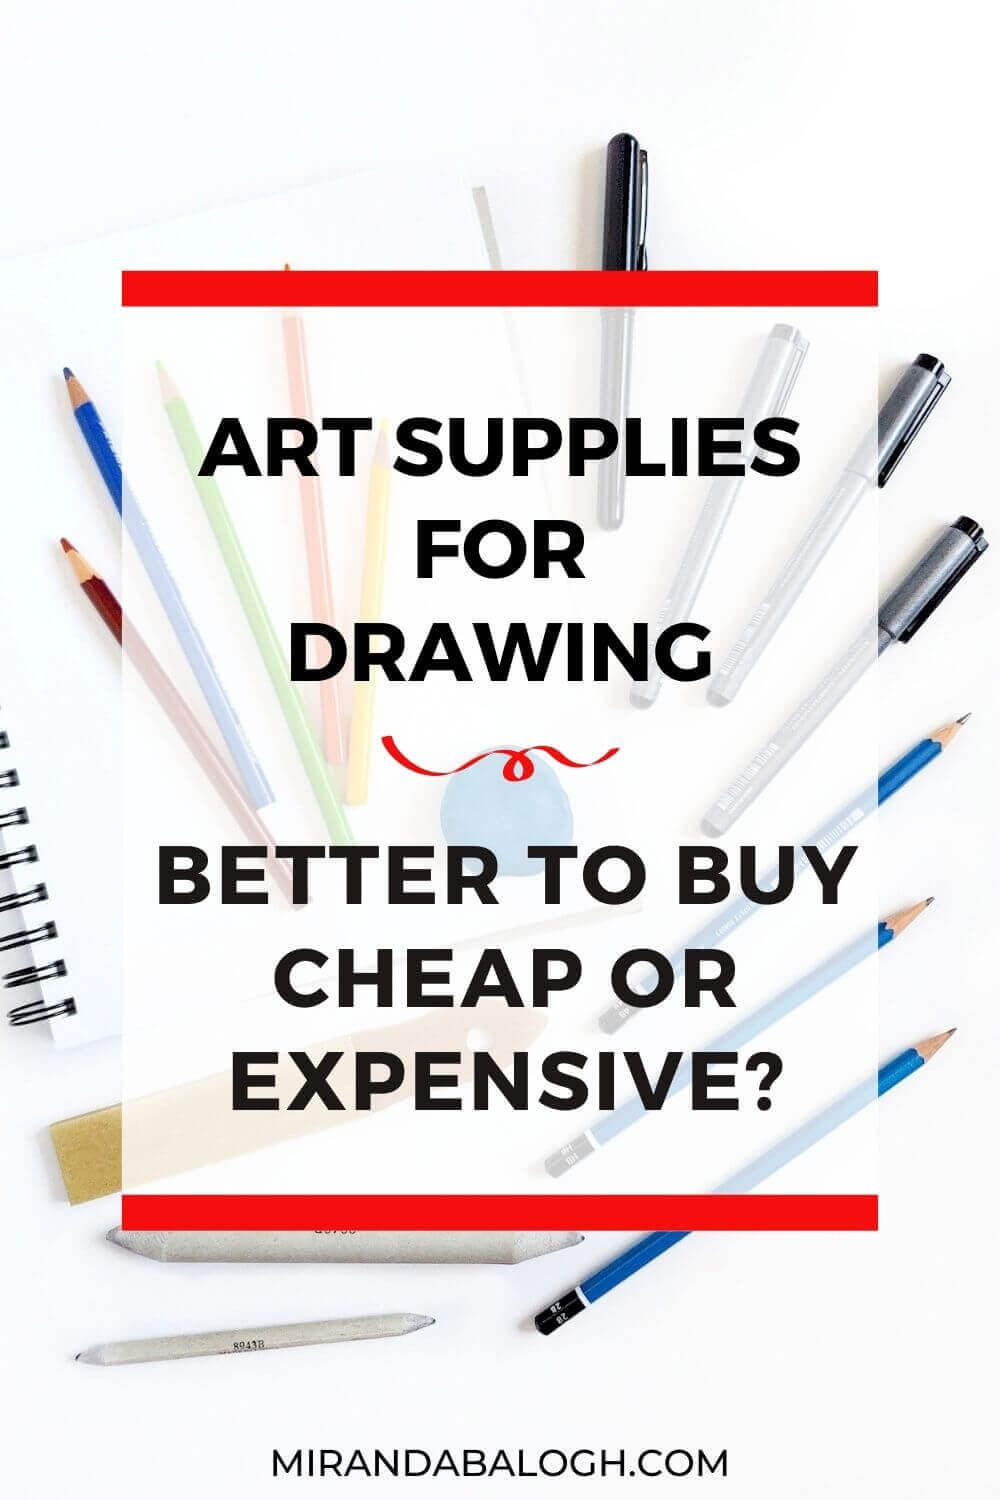 Art Supplies For Drawing: Better To Buy Cheap Or Expensive